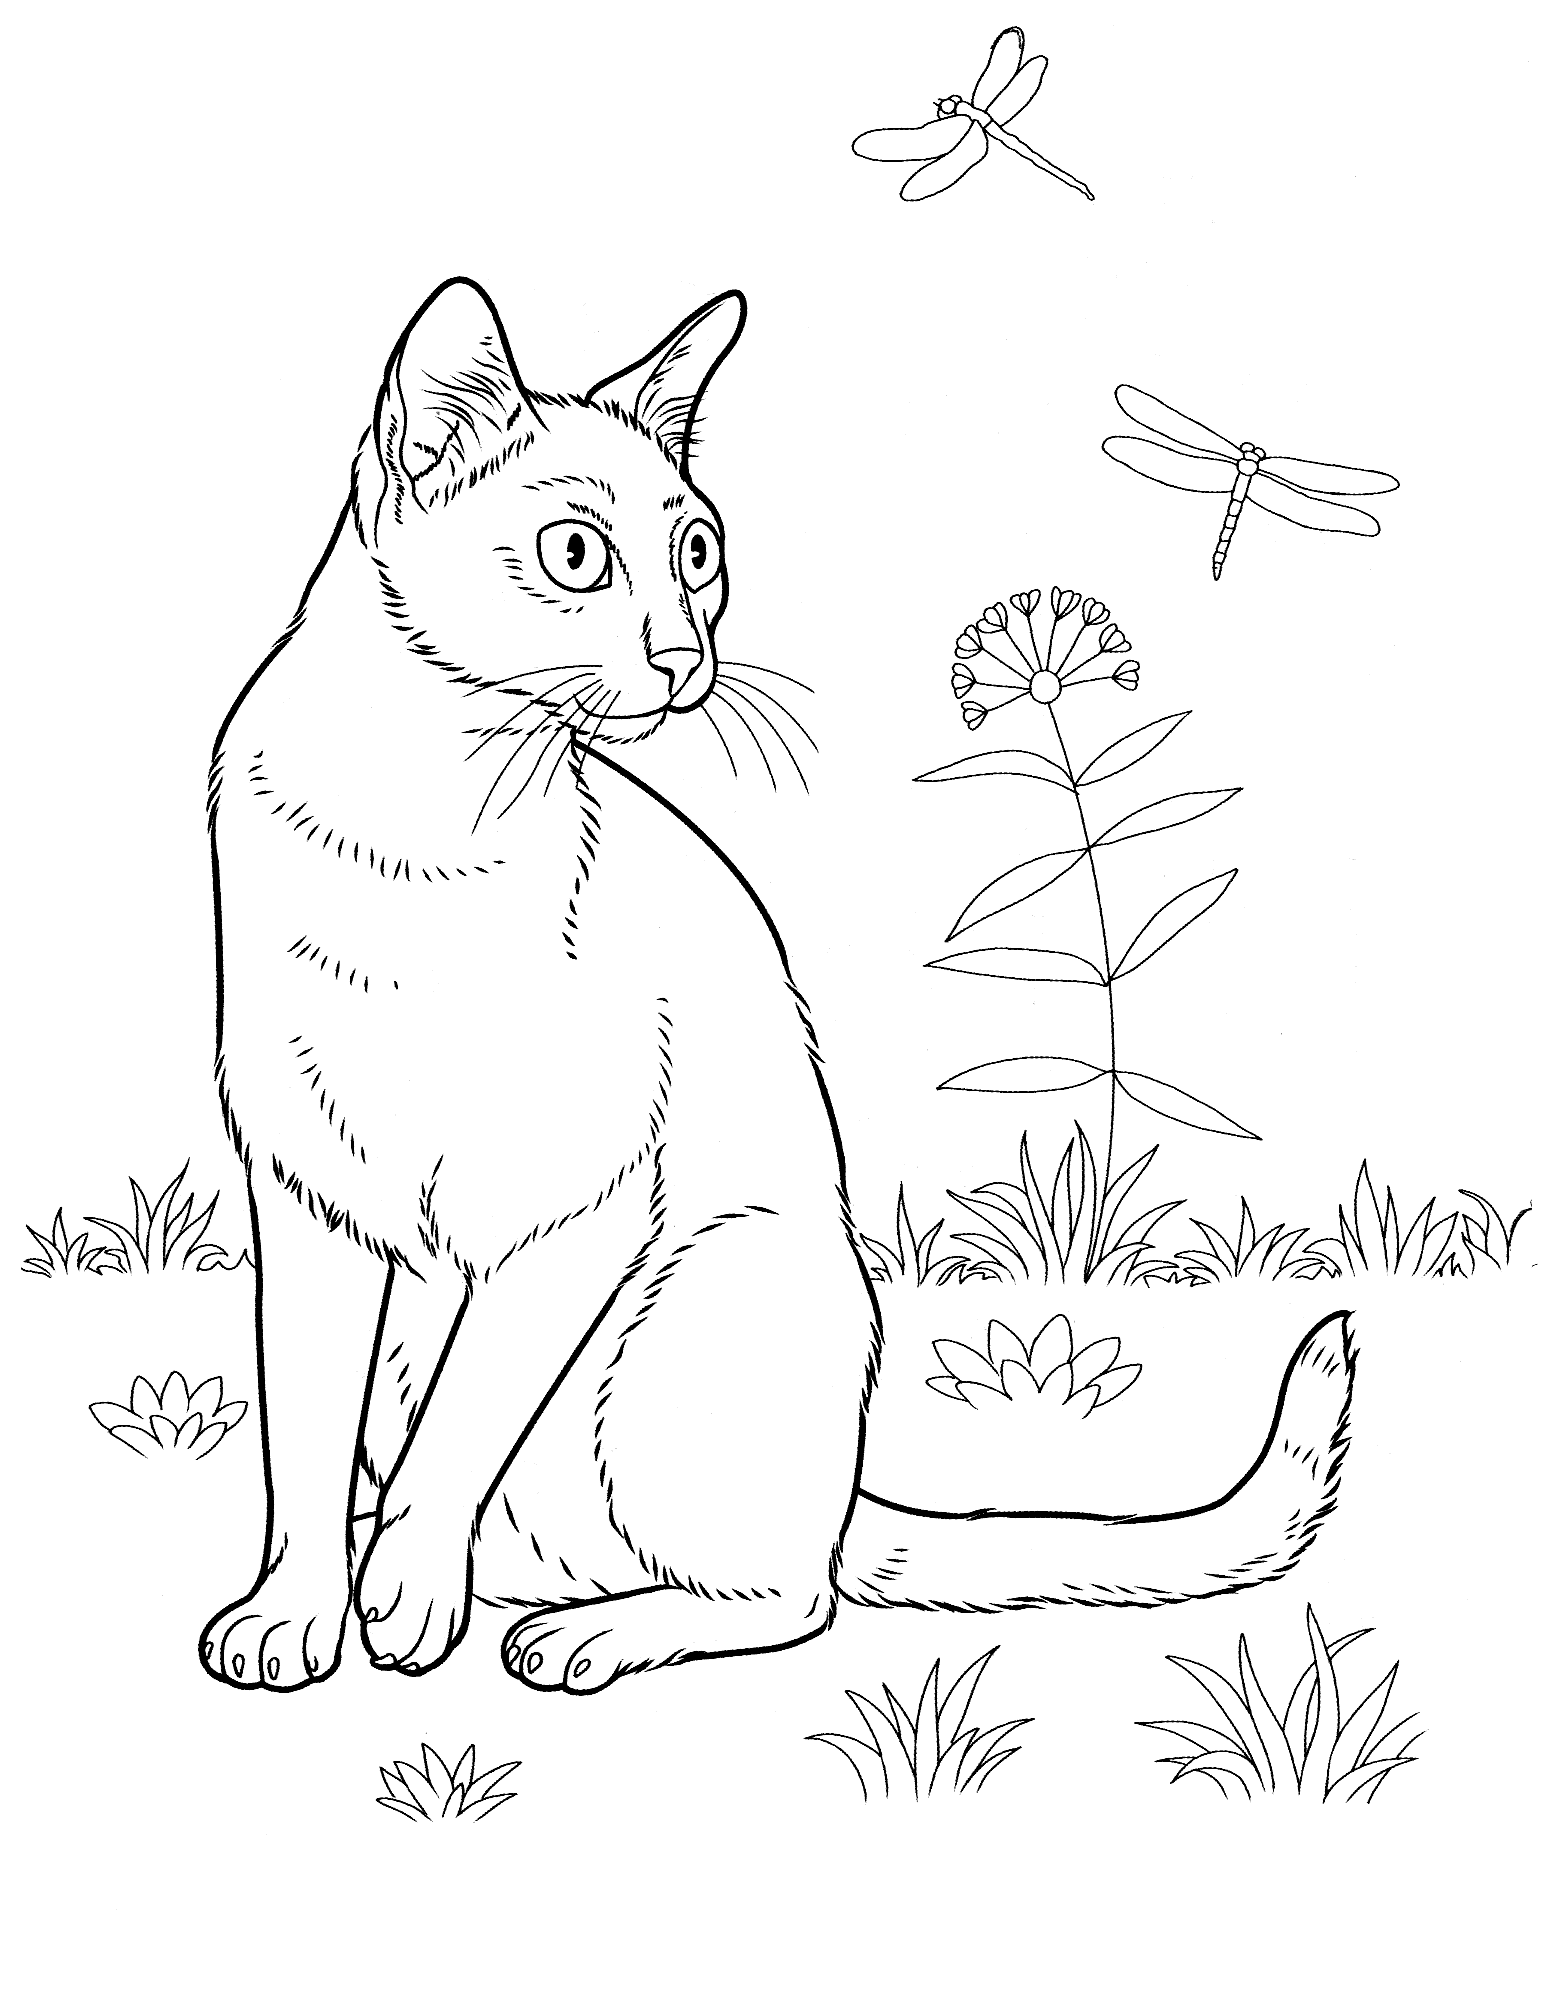 Coloring page - Bombay cat